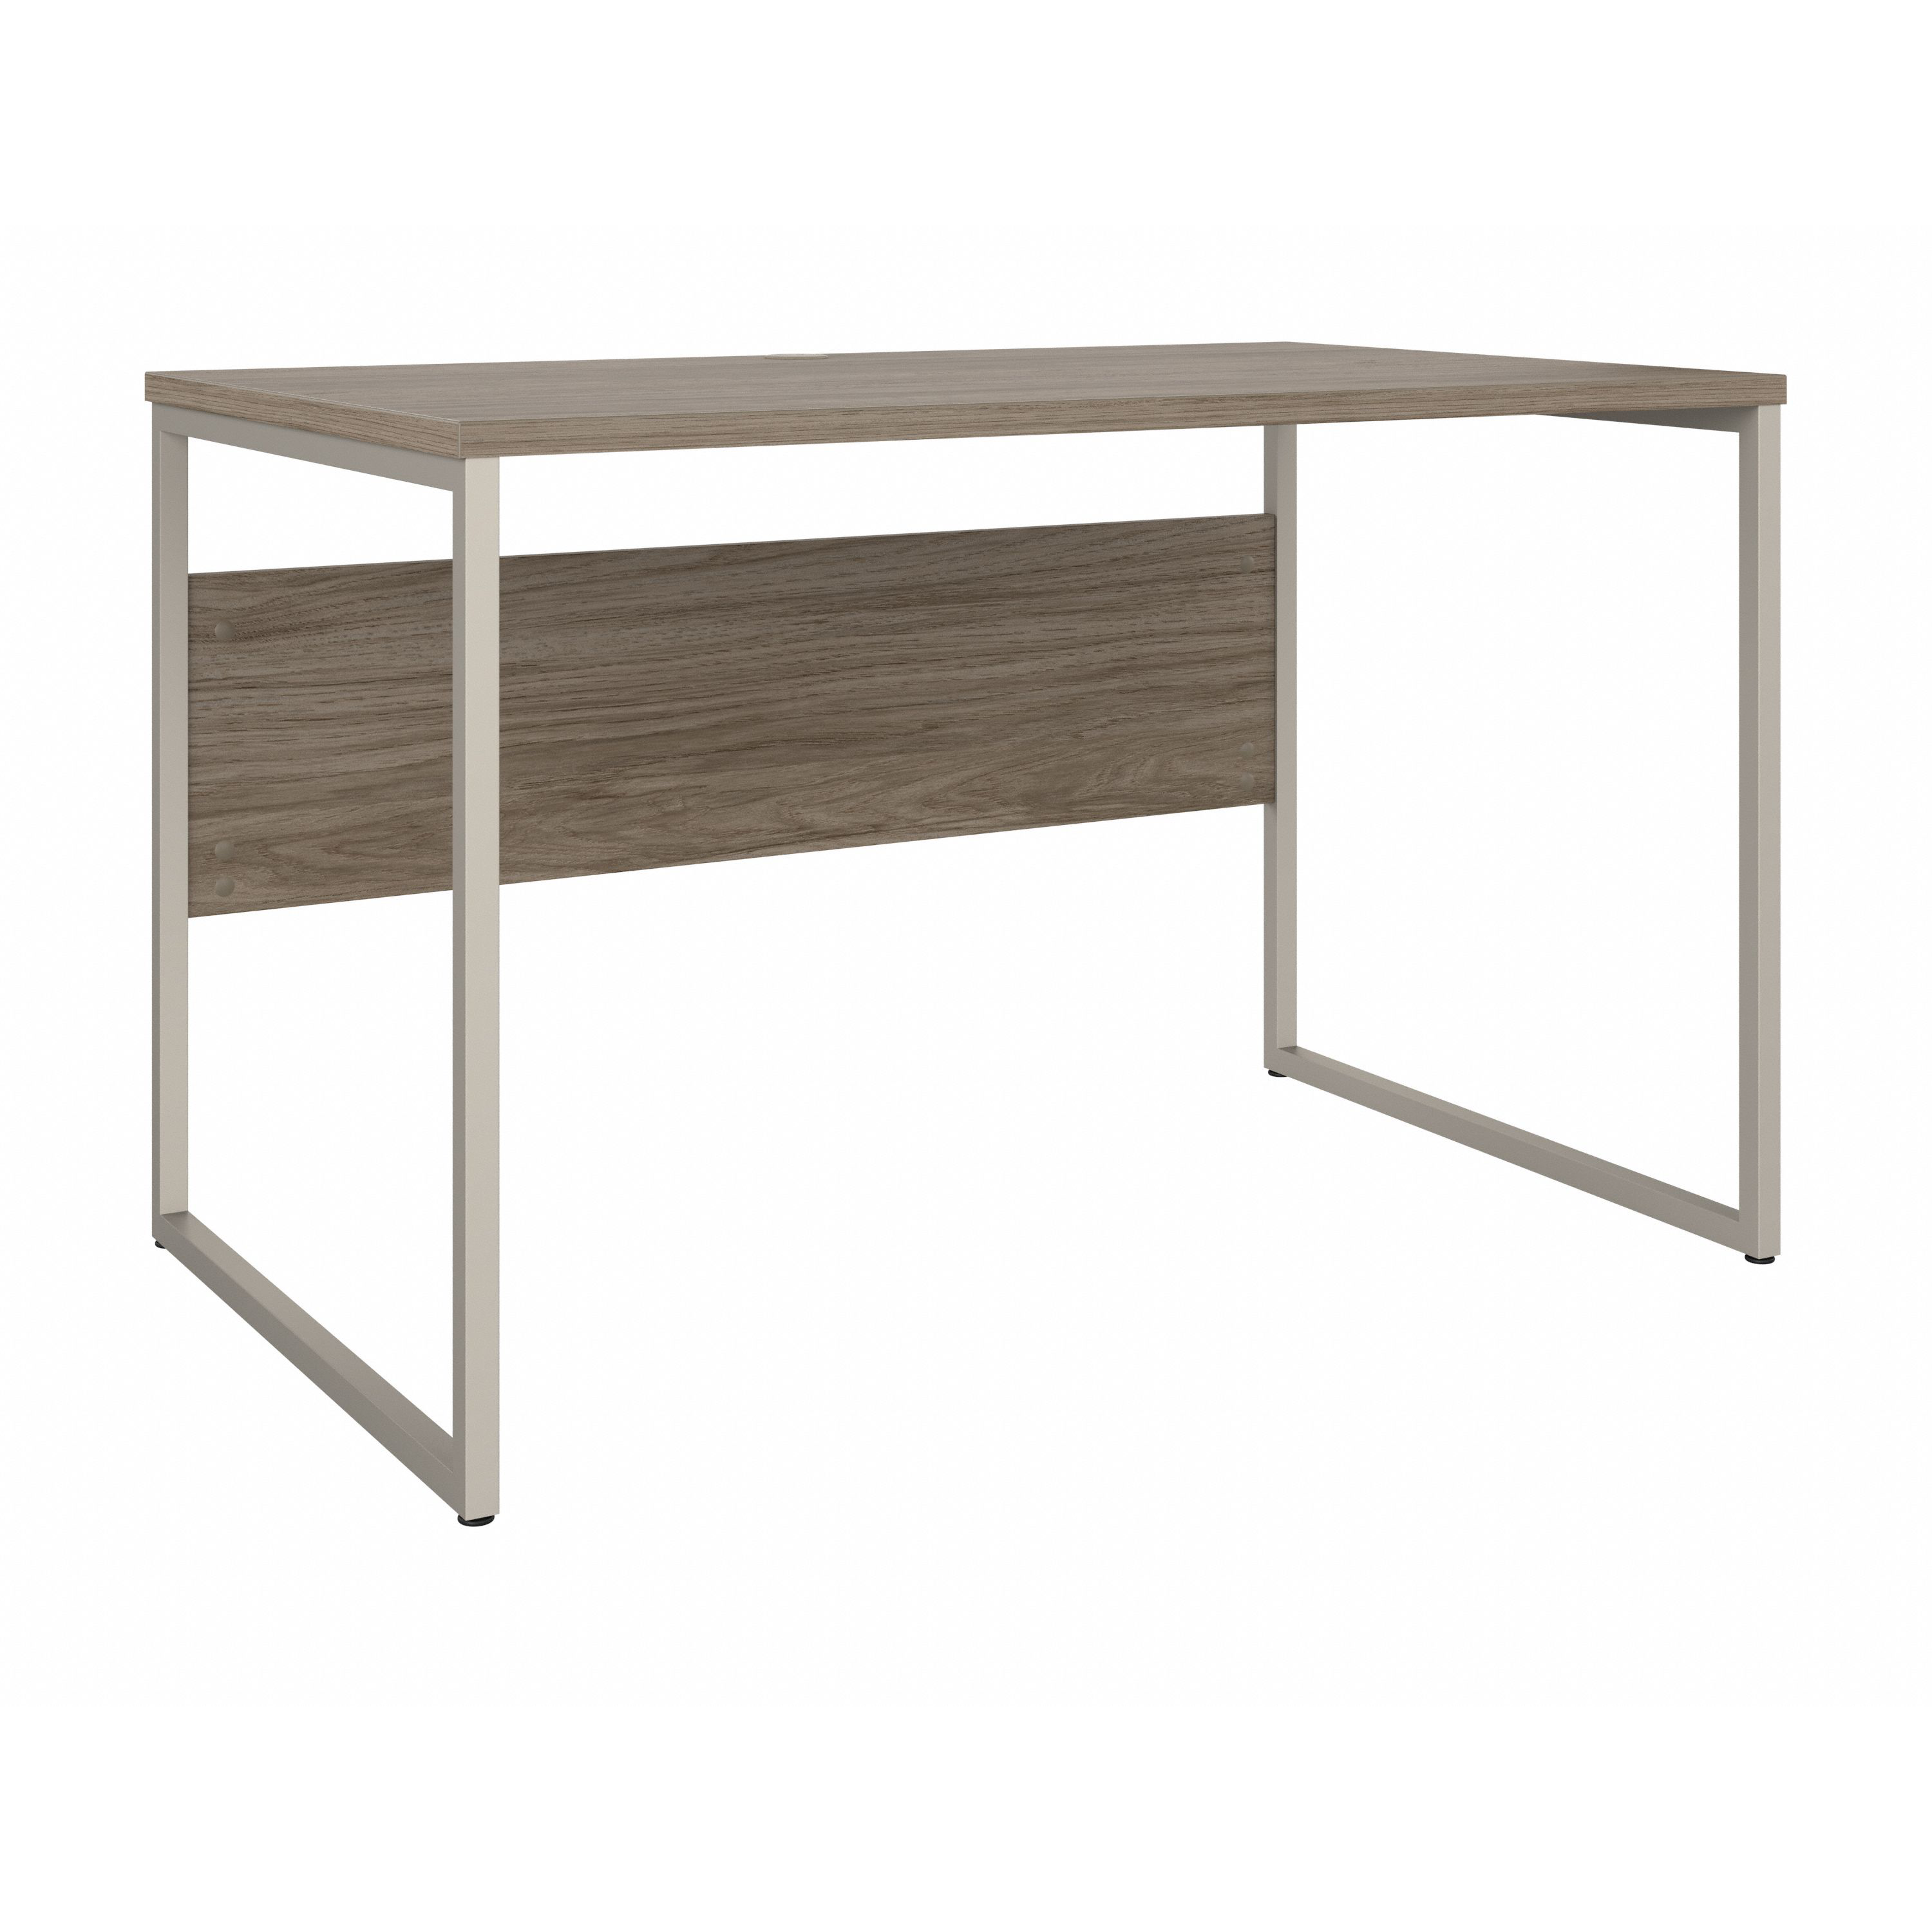 Shop Bush Business Furniture Hybrid 48W x 30D Computer Table Desk with Metal Legs 02 HYD248MH #color_modern hickory